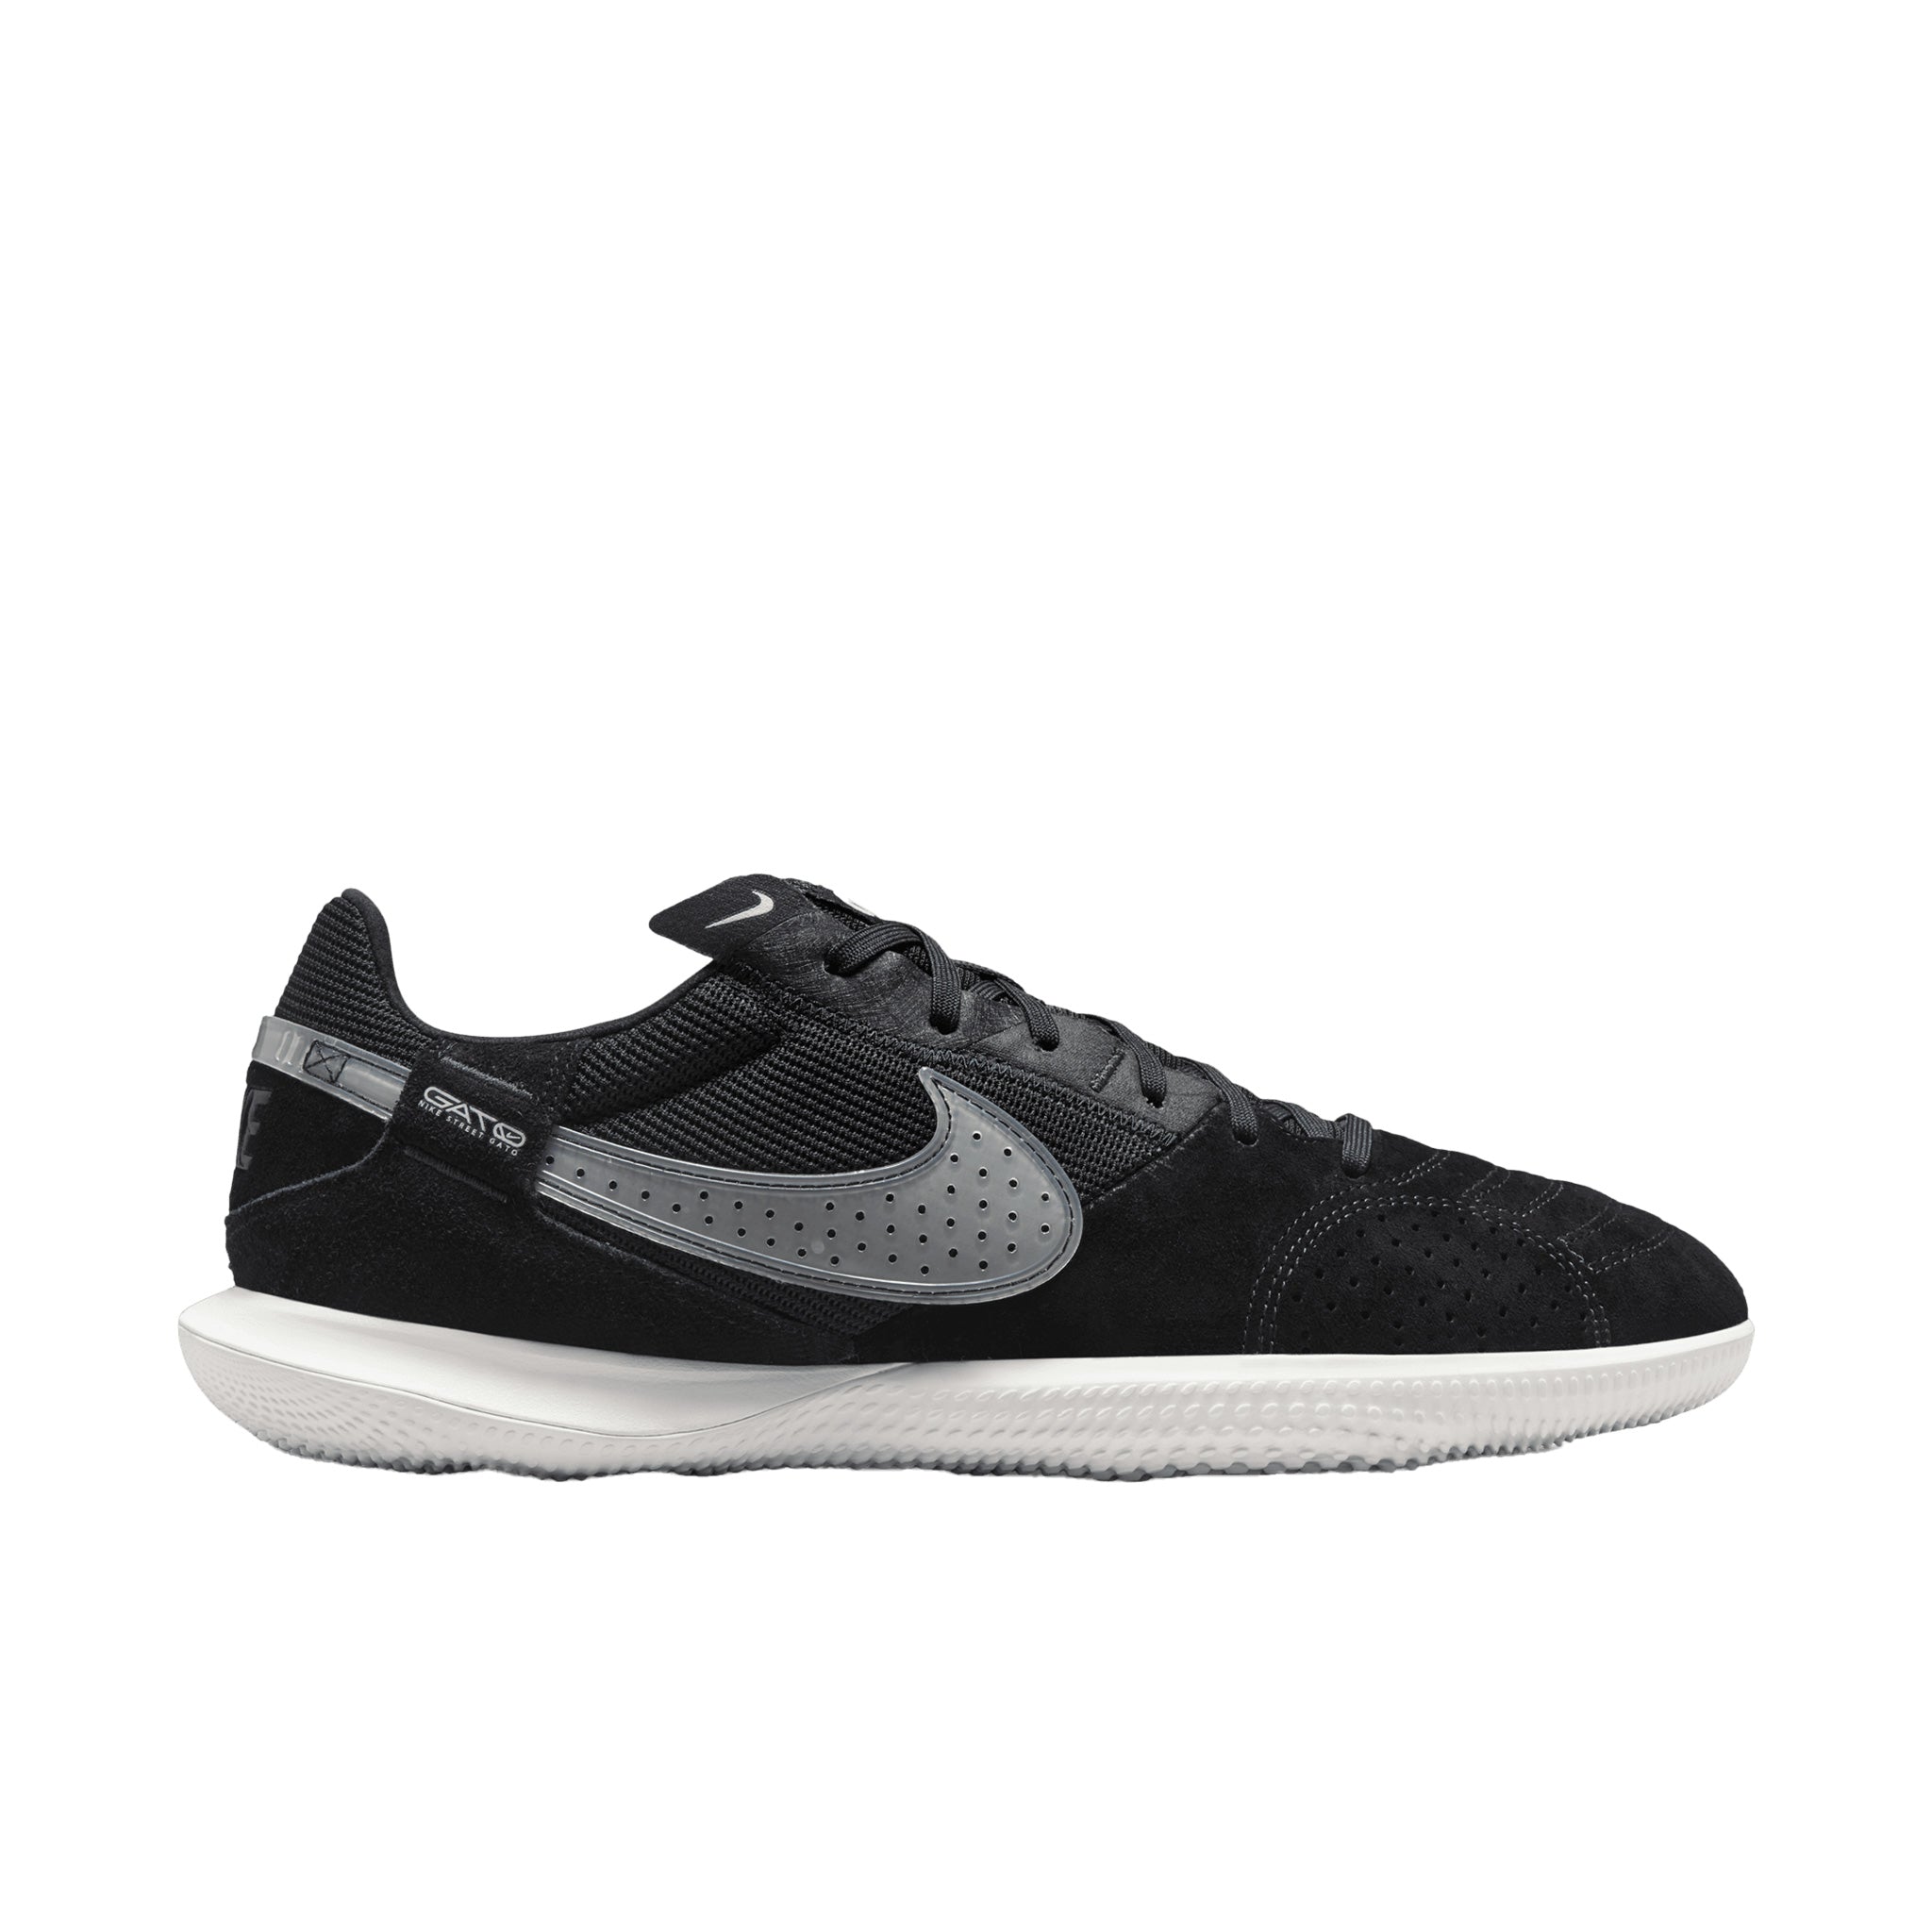 Streetgato Indoor Soccer Shoes